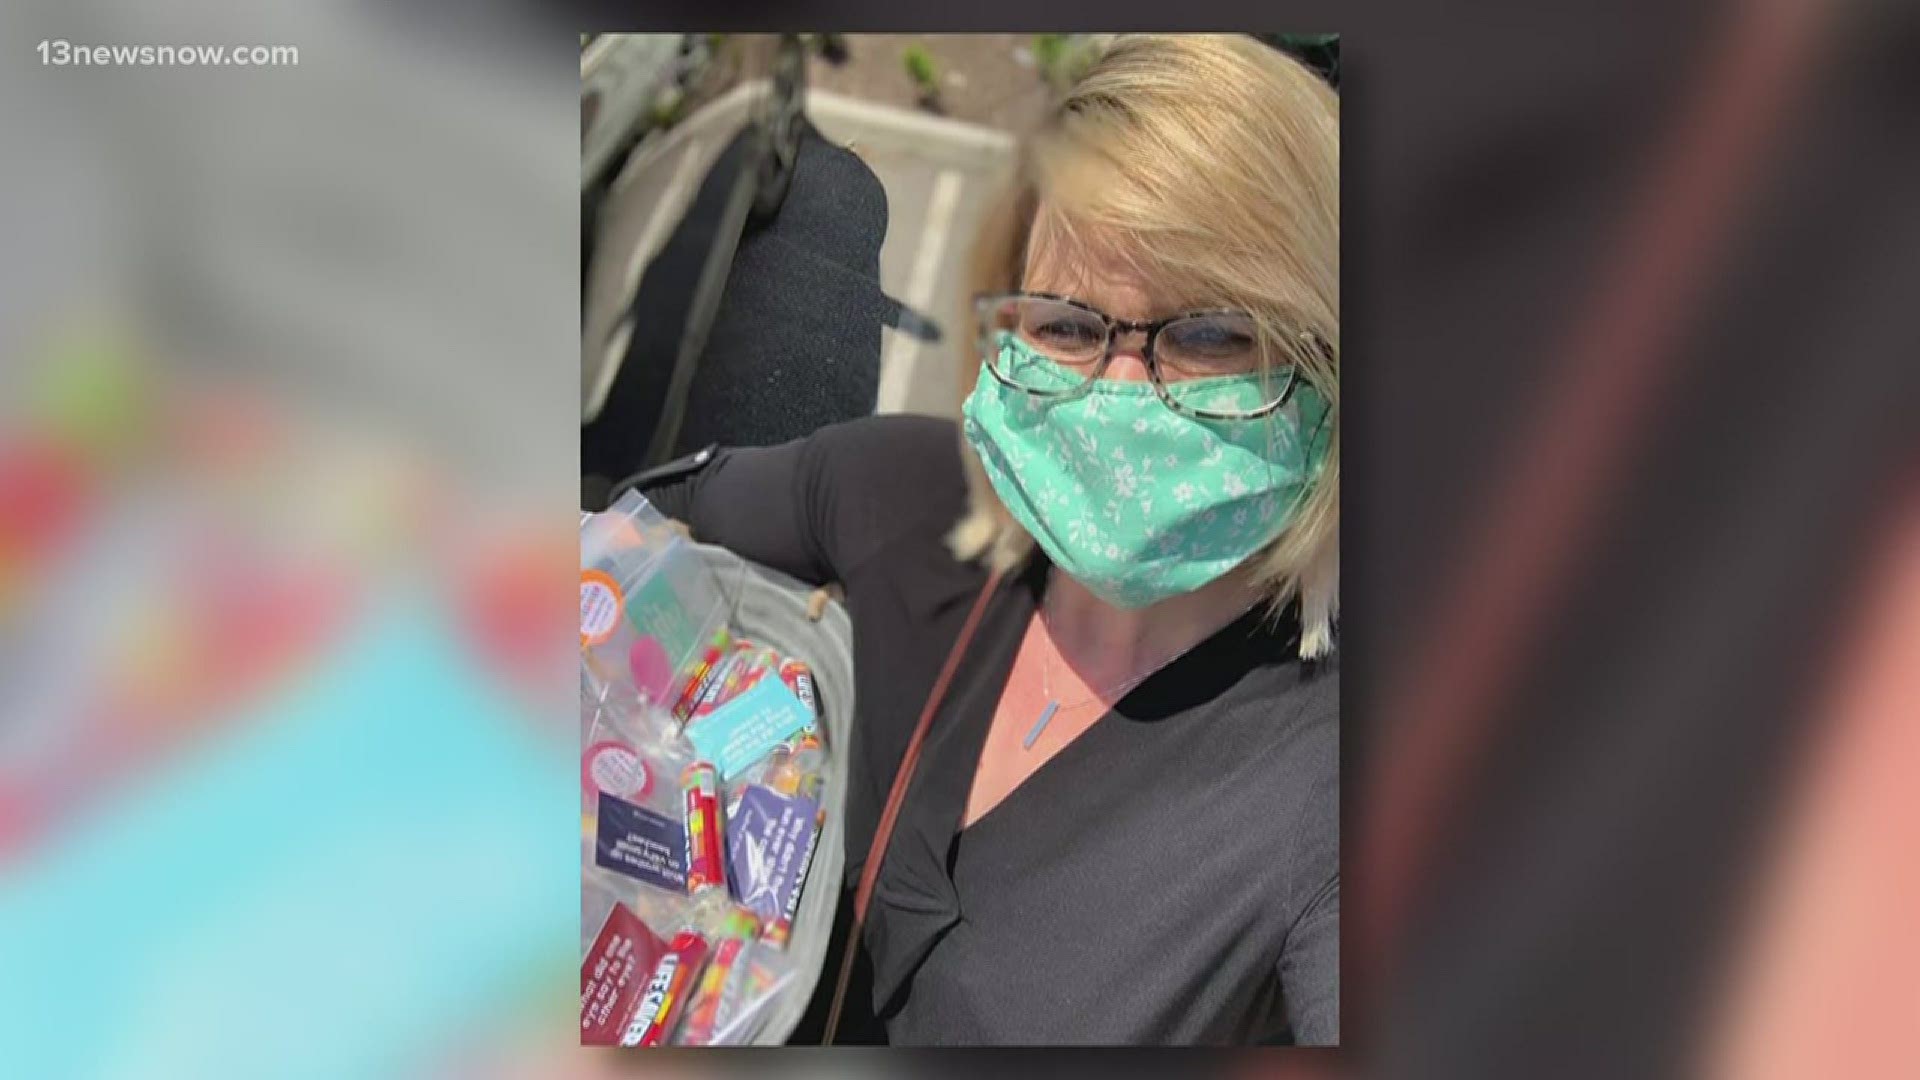 Ashley McDougal started a Facebook group to help healthcare workers. Members are dropping off what they call "sunshine" treats in hopes of bringing them joy.